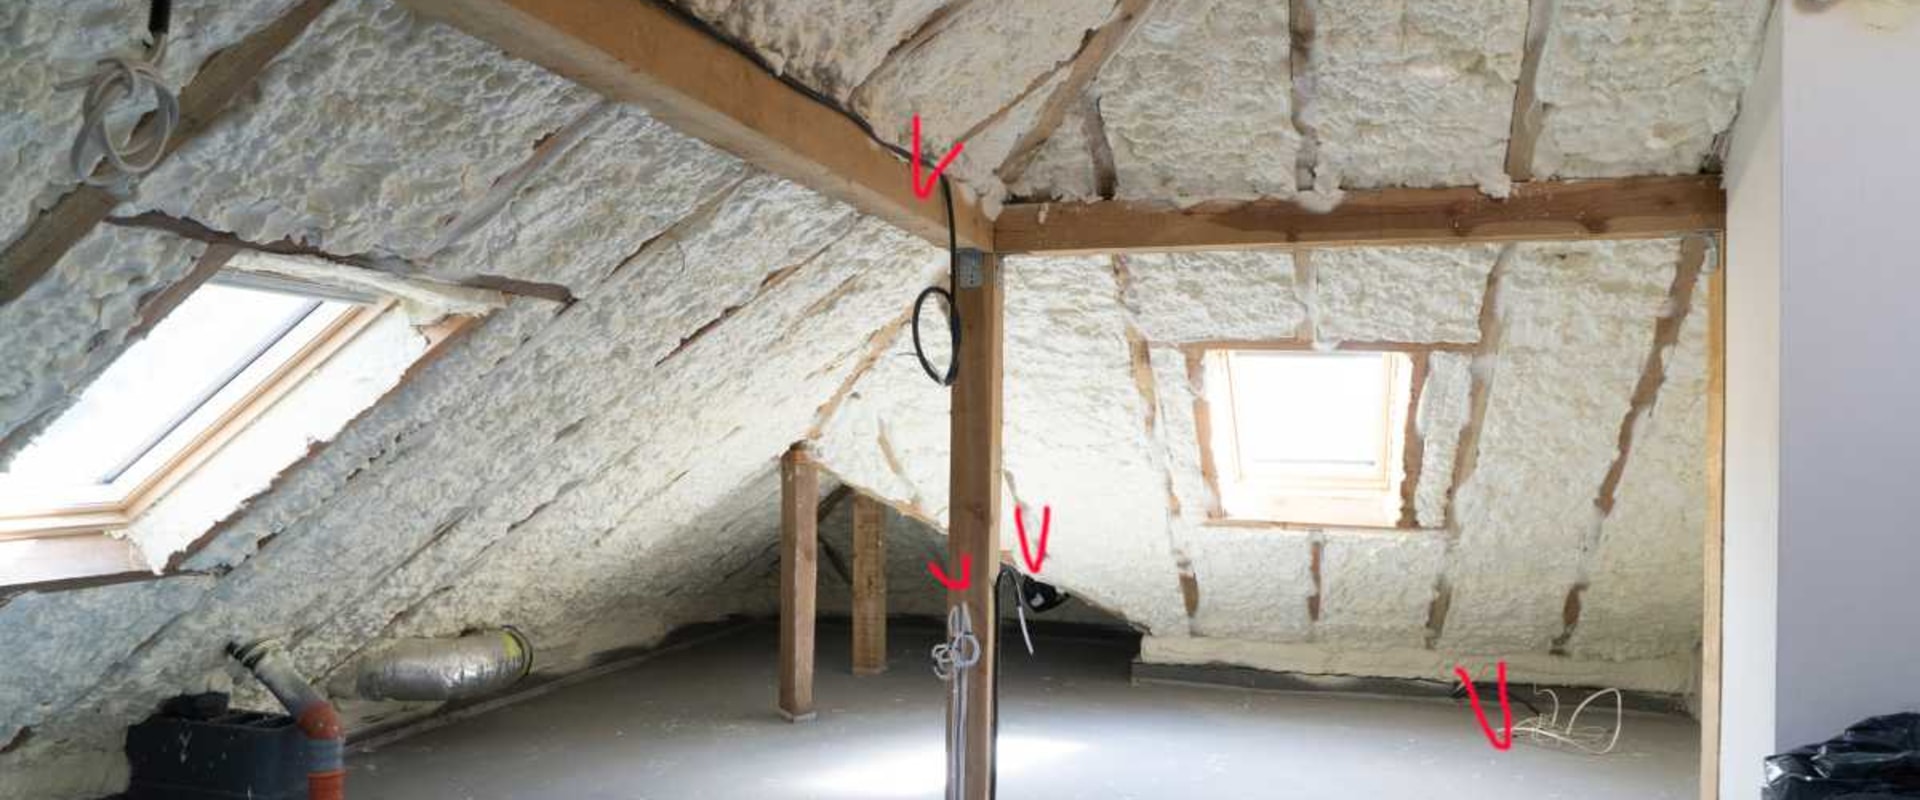 Getting Comfort With Attic Insulation Installation Services